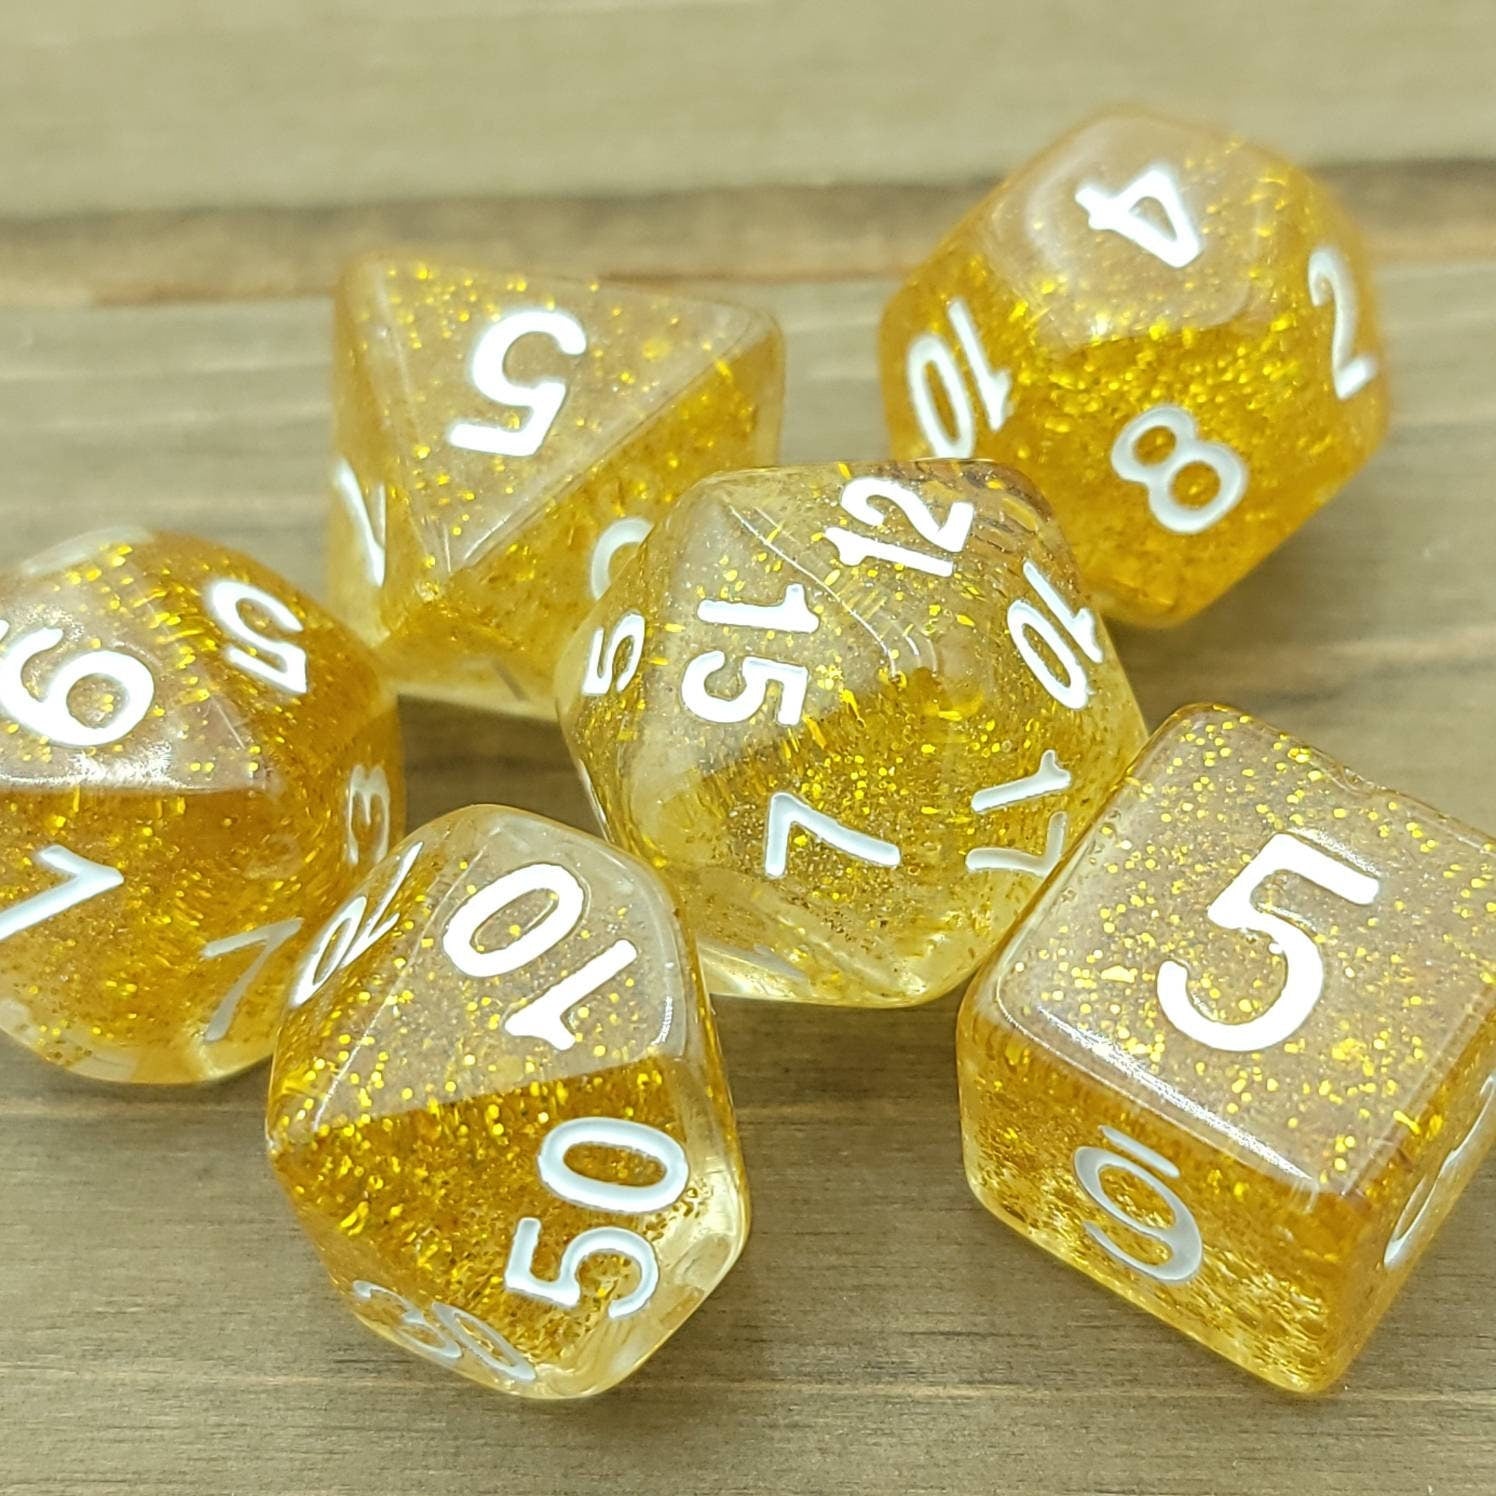 The Treasury | RPG Dice Set| RPG Dice | Polyhedral Dice Set | Dungeons and Dragons | DnD Dice Set | Gaming Dice Set